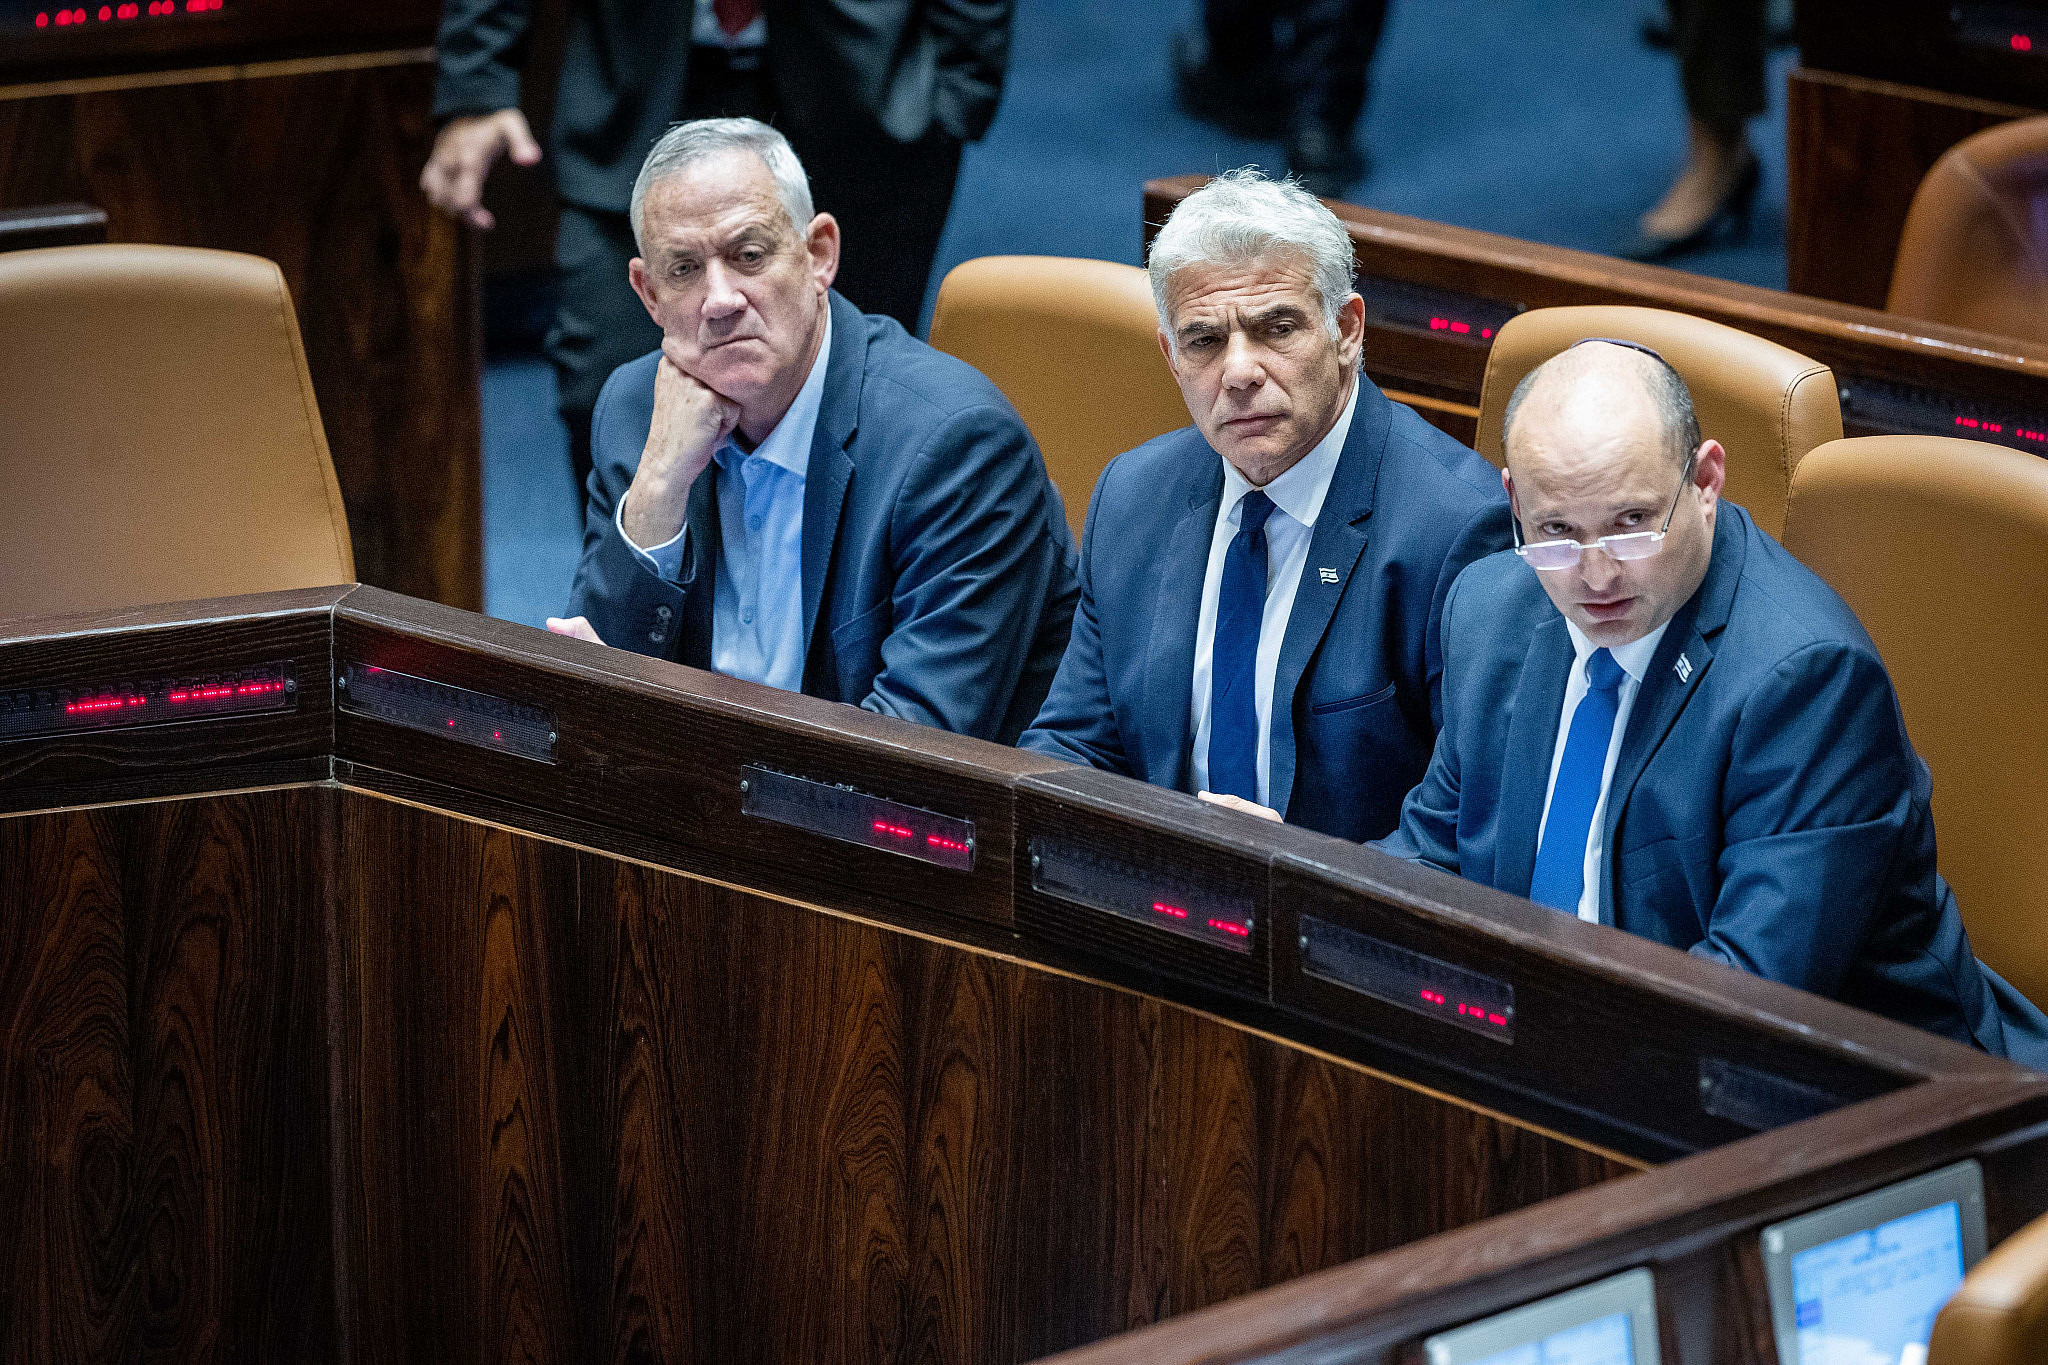 Israeli Prime Minister Naftali Bennett, Minister of Foreign Affairs Yair Lapid, and Minister of Defense Benny Gantz seen during a discussion and vote on the "settler law bill" at the Knesset in Jerusalem, June 6, 2022. (Yonatan Sindel/Flash90)